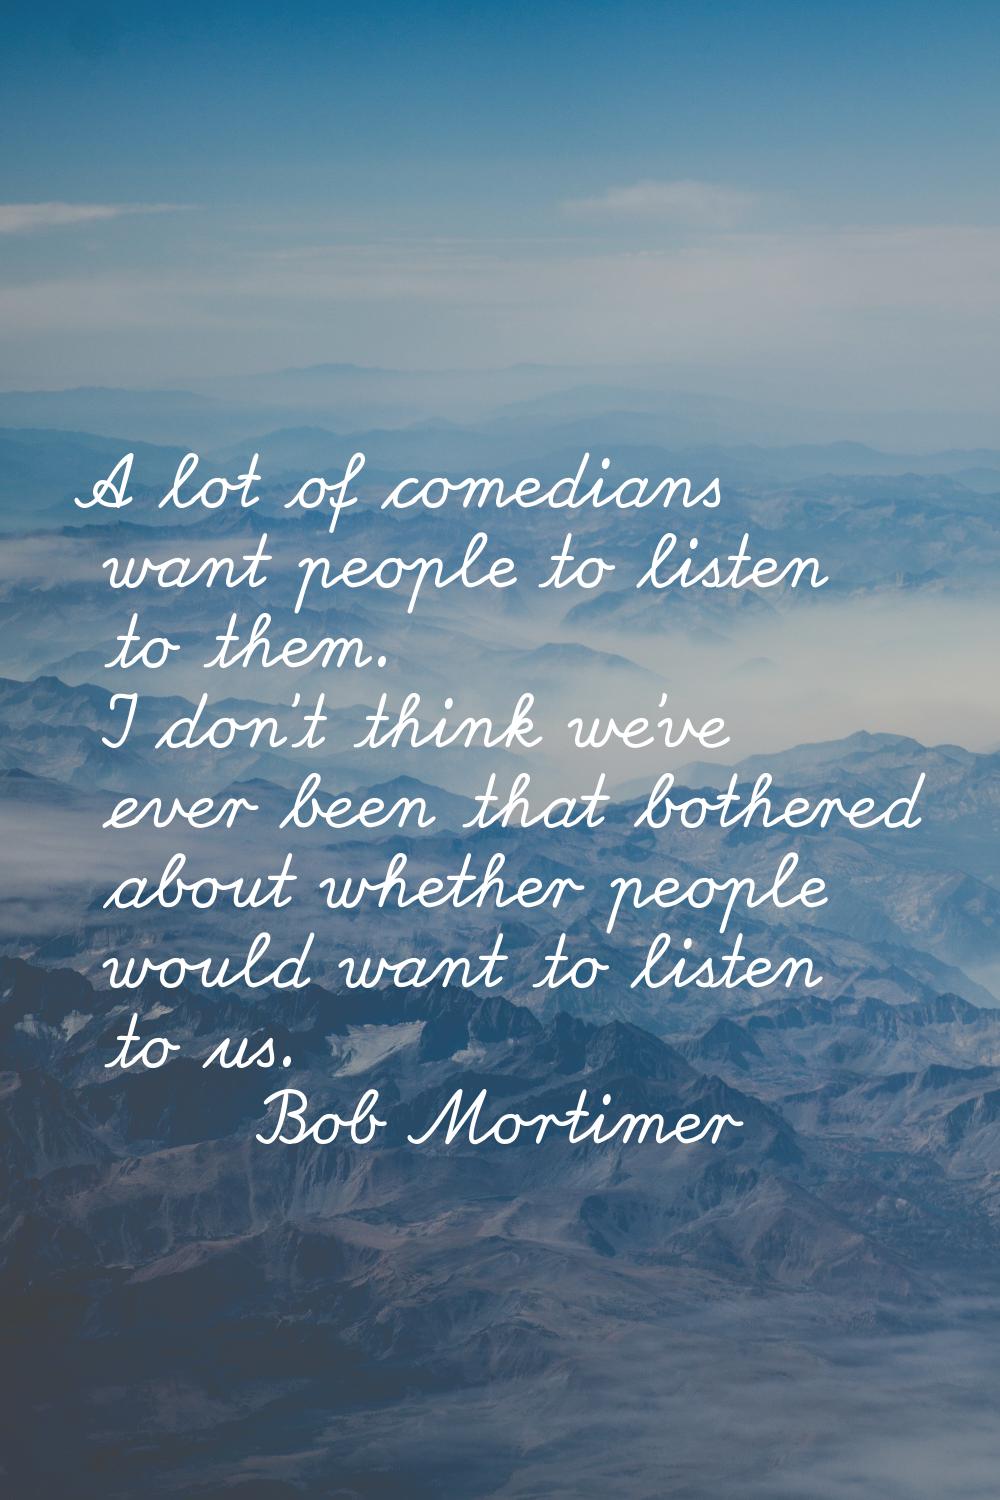 A lot of comedians want people to listen to them. I don't think we've ever been that bothered about